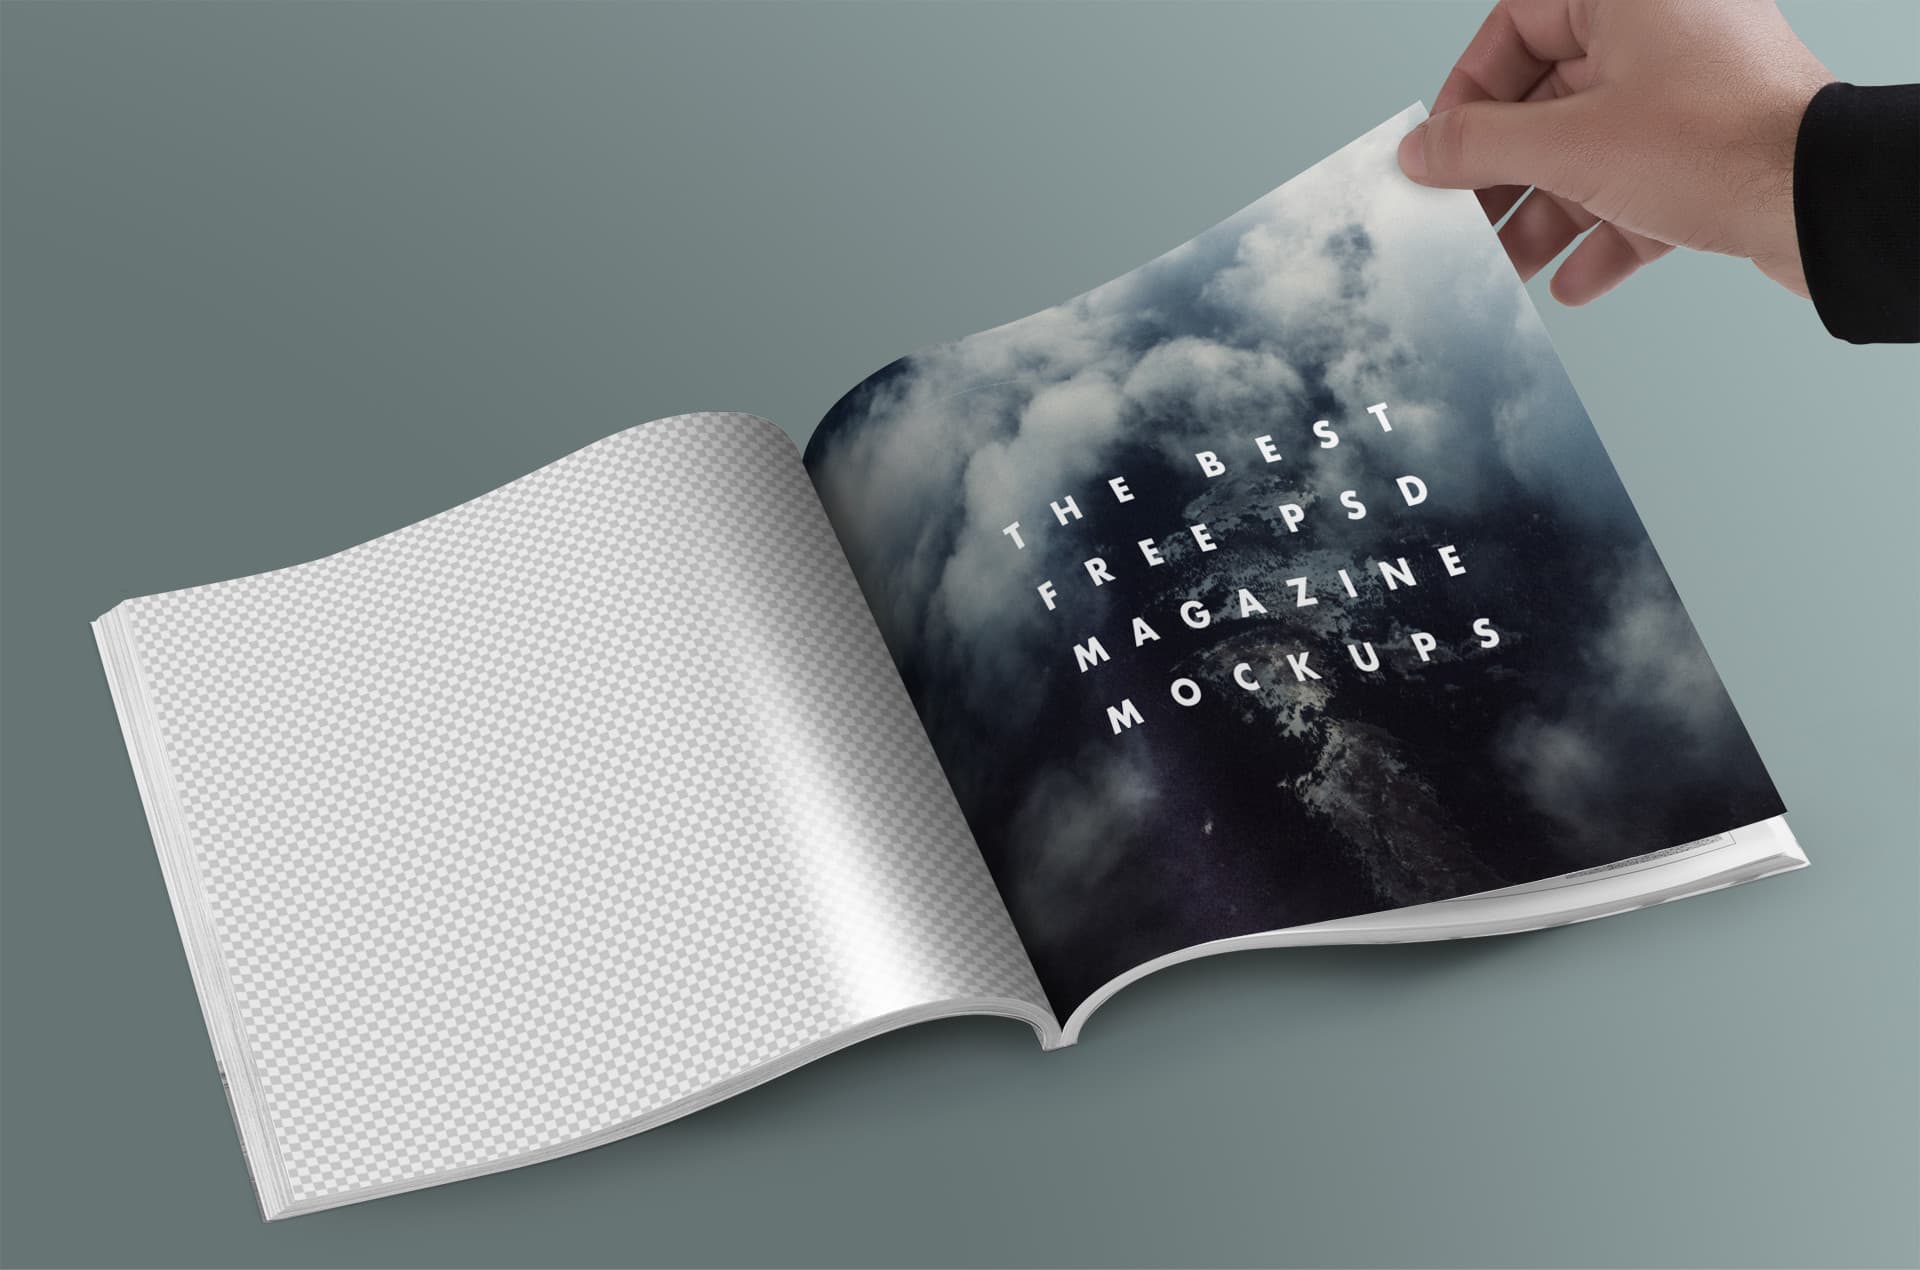 Download The Best 15+ FREE PSD Magazine Mockups | Hipsthetic PSD Mockup Templates